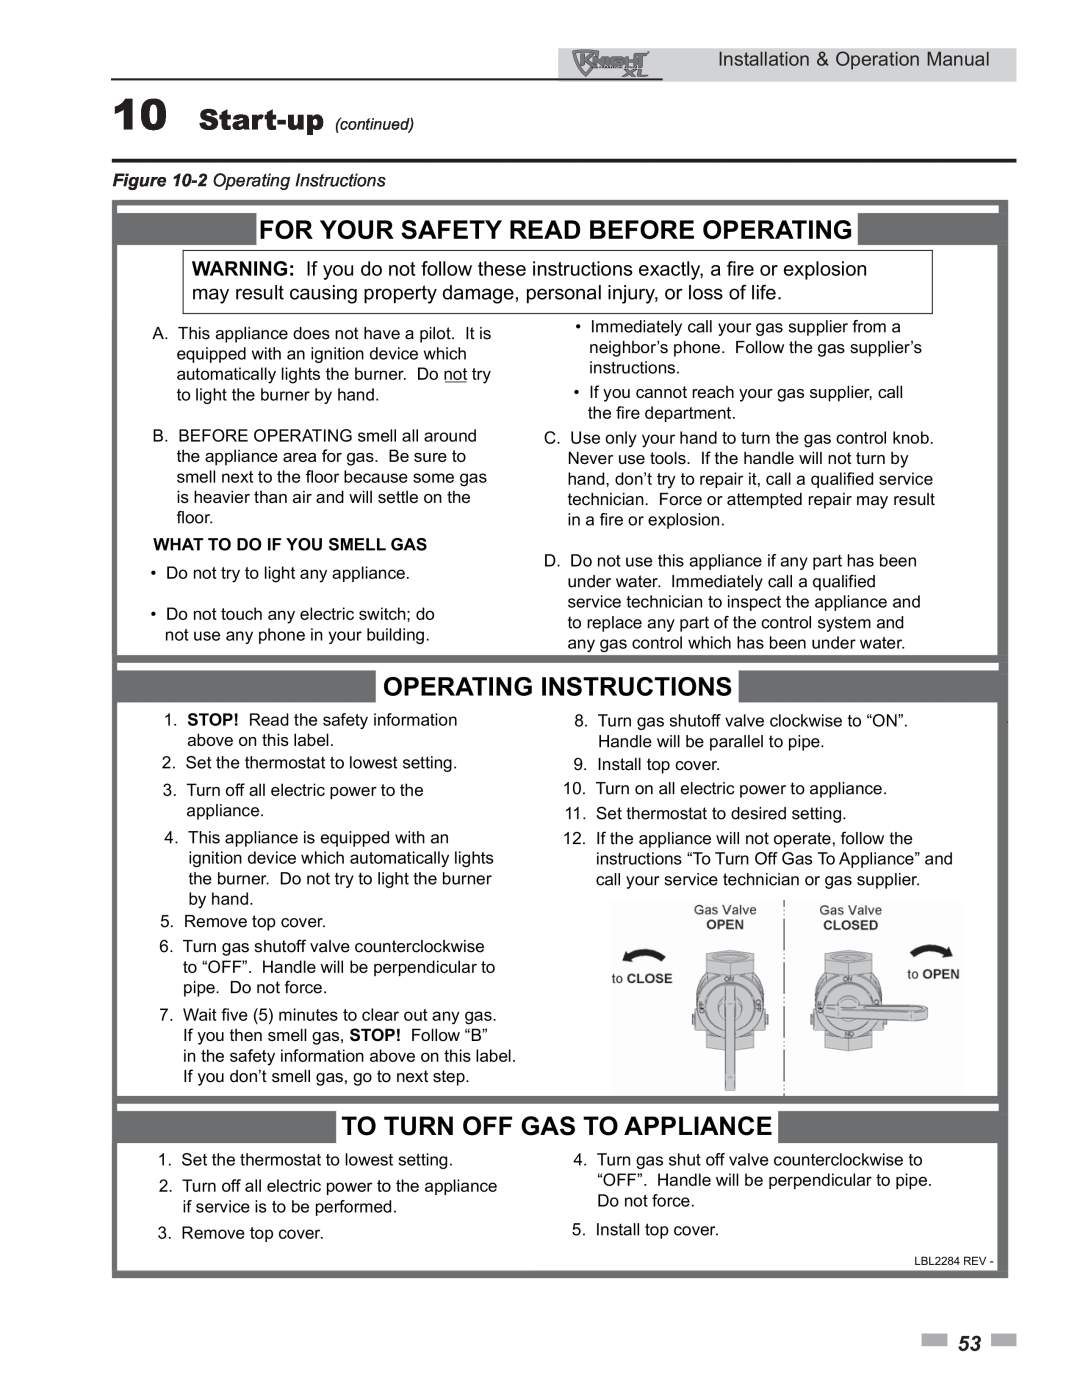 Lochinvar 399 operation manual For Your Safety Read Before Operating, Operating Instructions, To Turn Off Gas To Appliance 